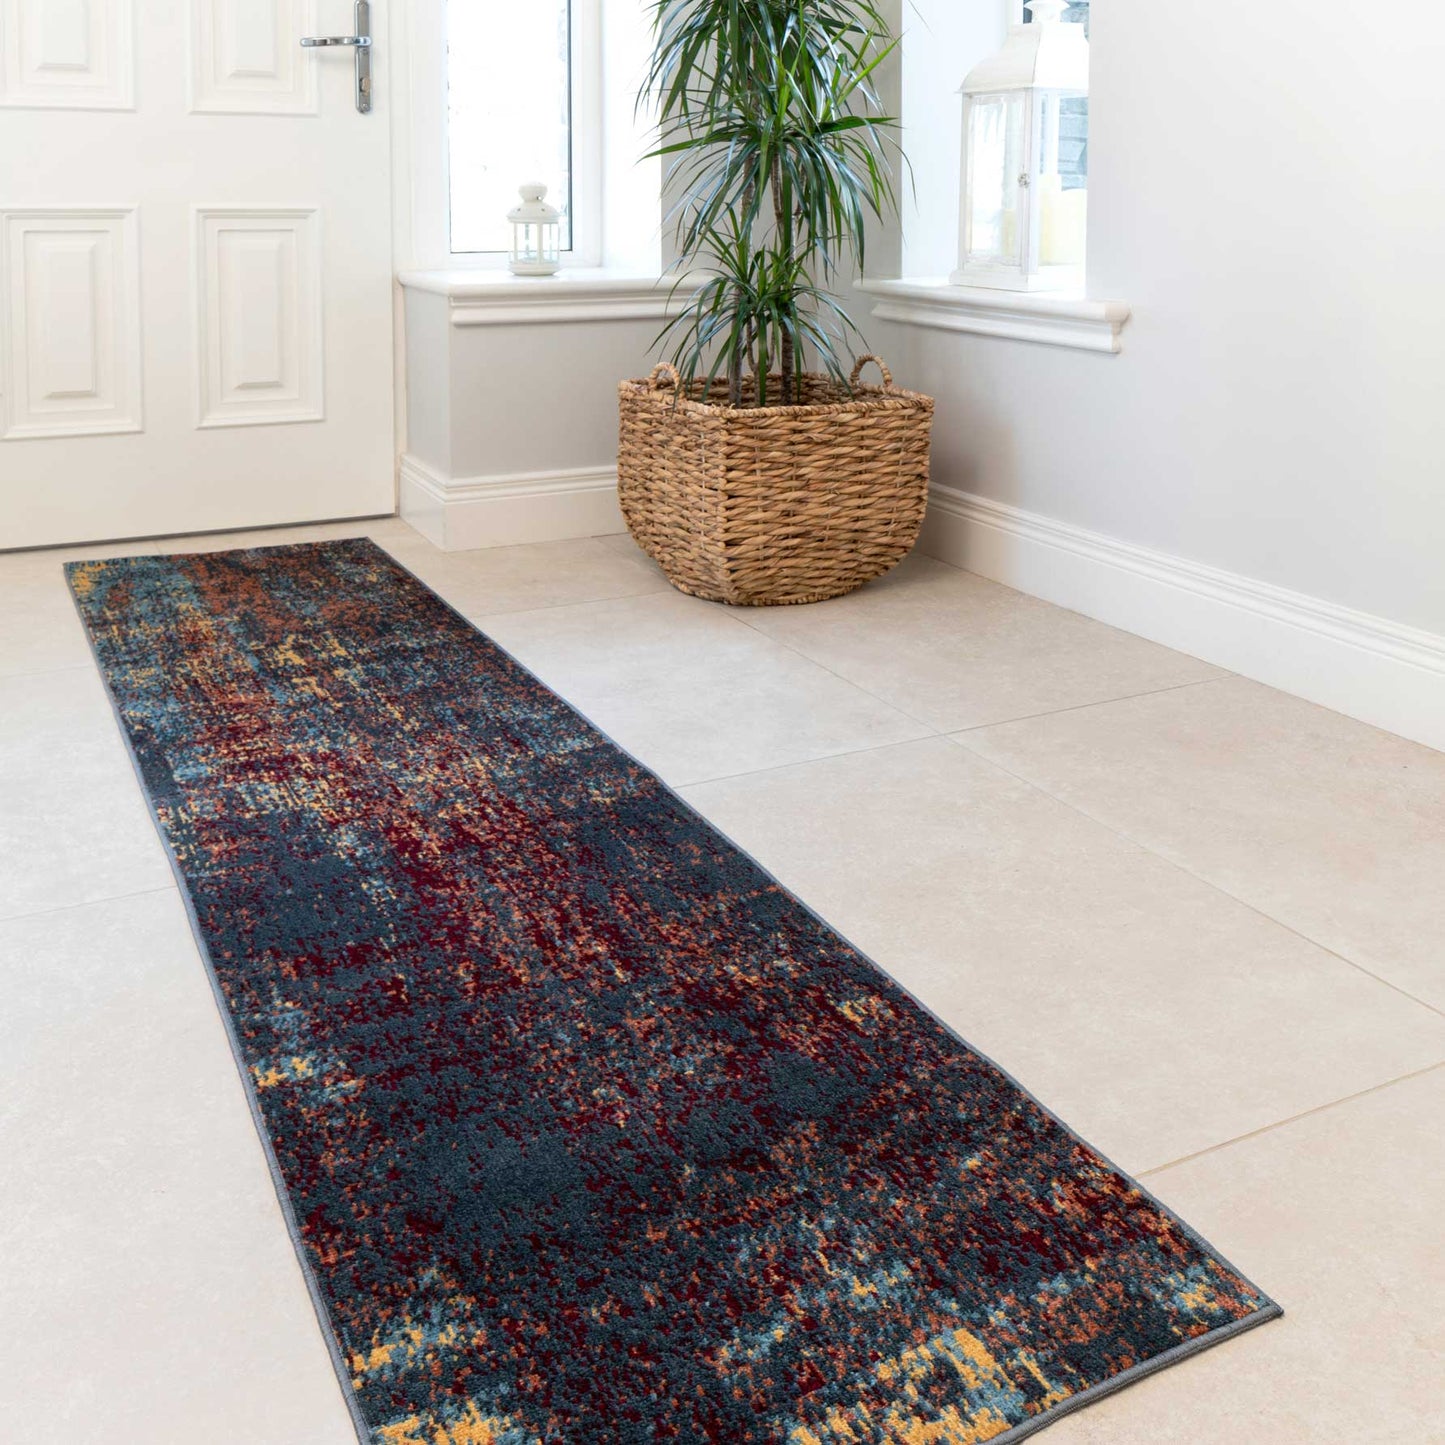 Soft Distressed Rustic Hall Runner Rug